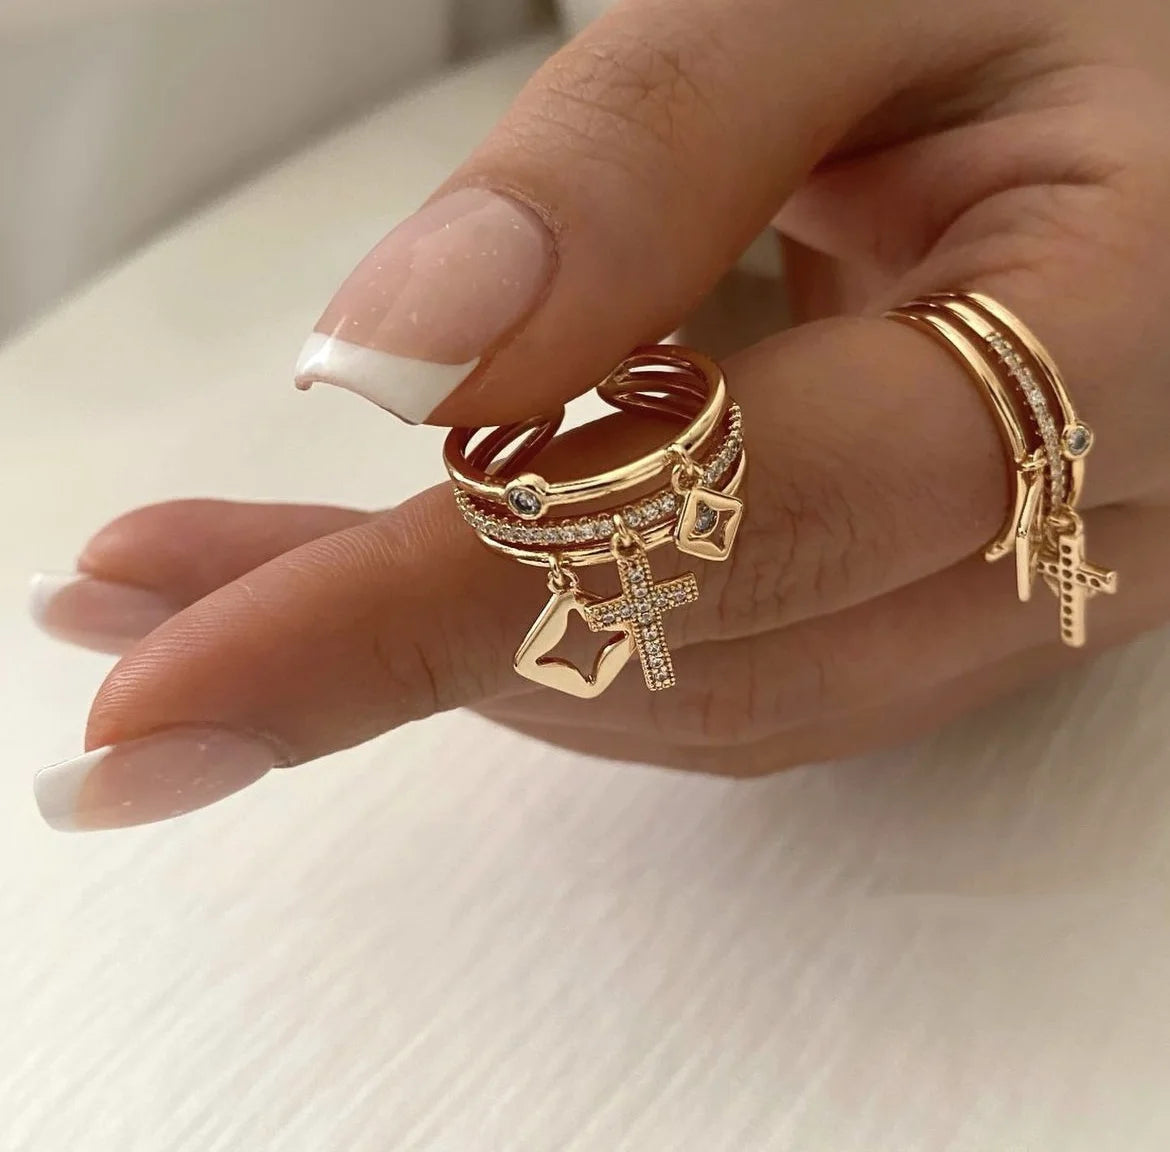 IceBox DC Trendy Collection - 18K Gold Plated Sun Rings for Women - Natural Stone Inlaid in Hollow Metal Texture - Hip Hop Luxury Jewelry